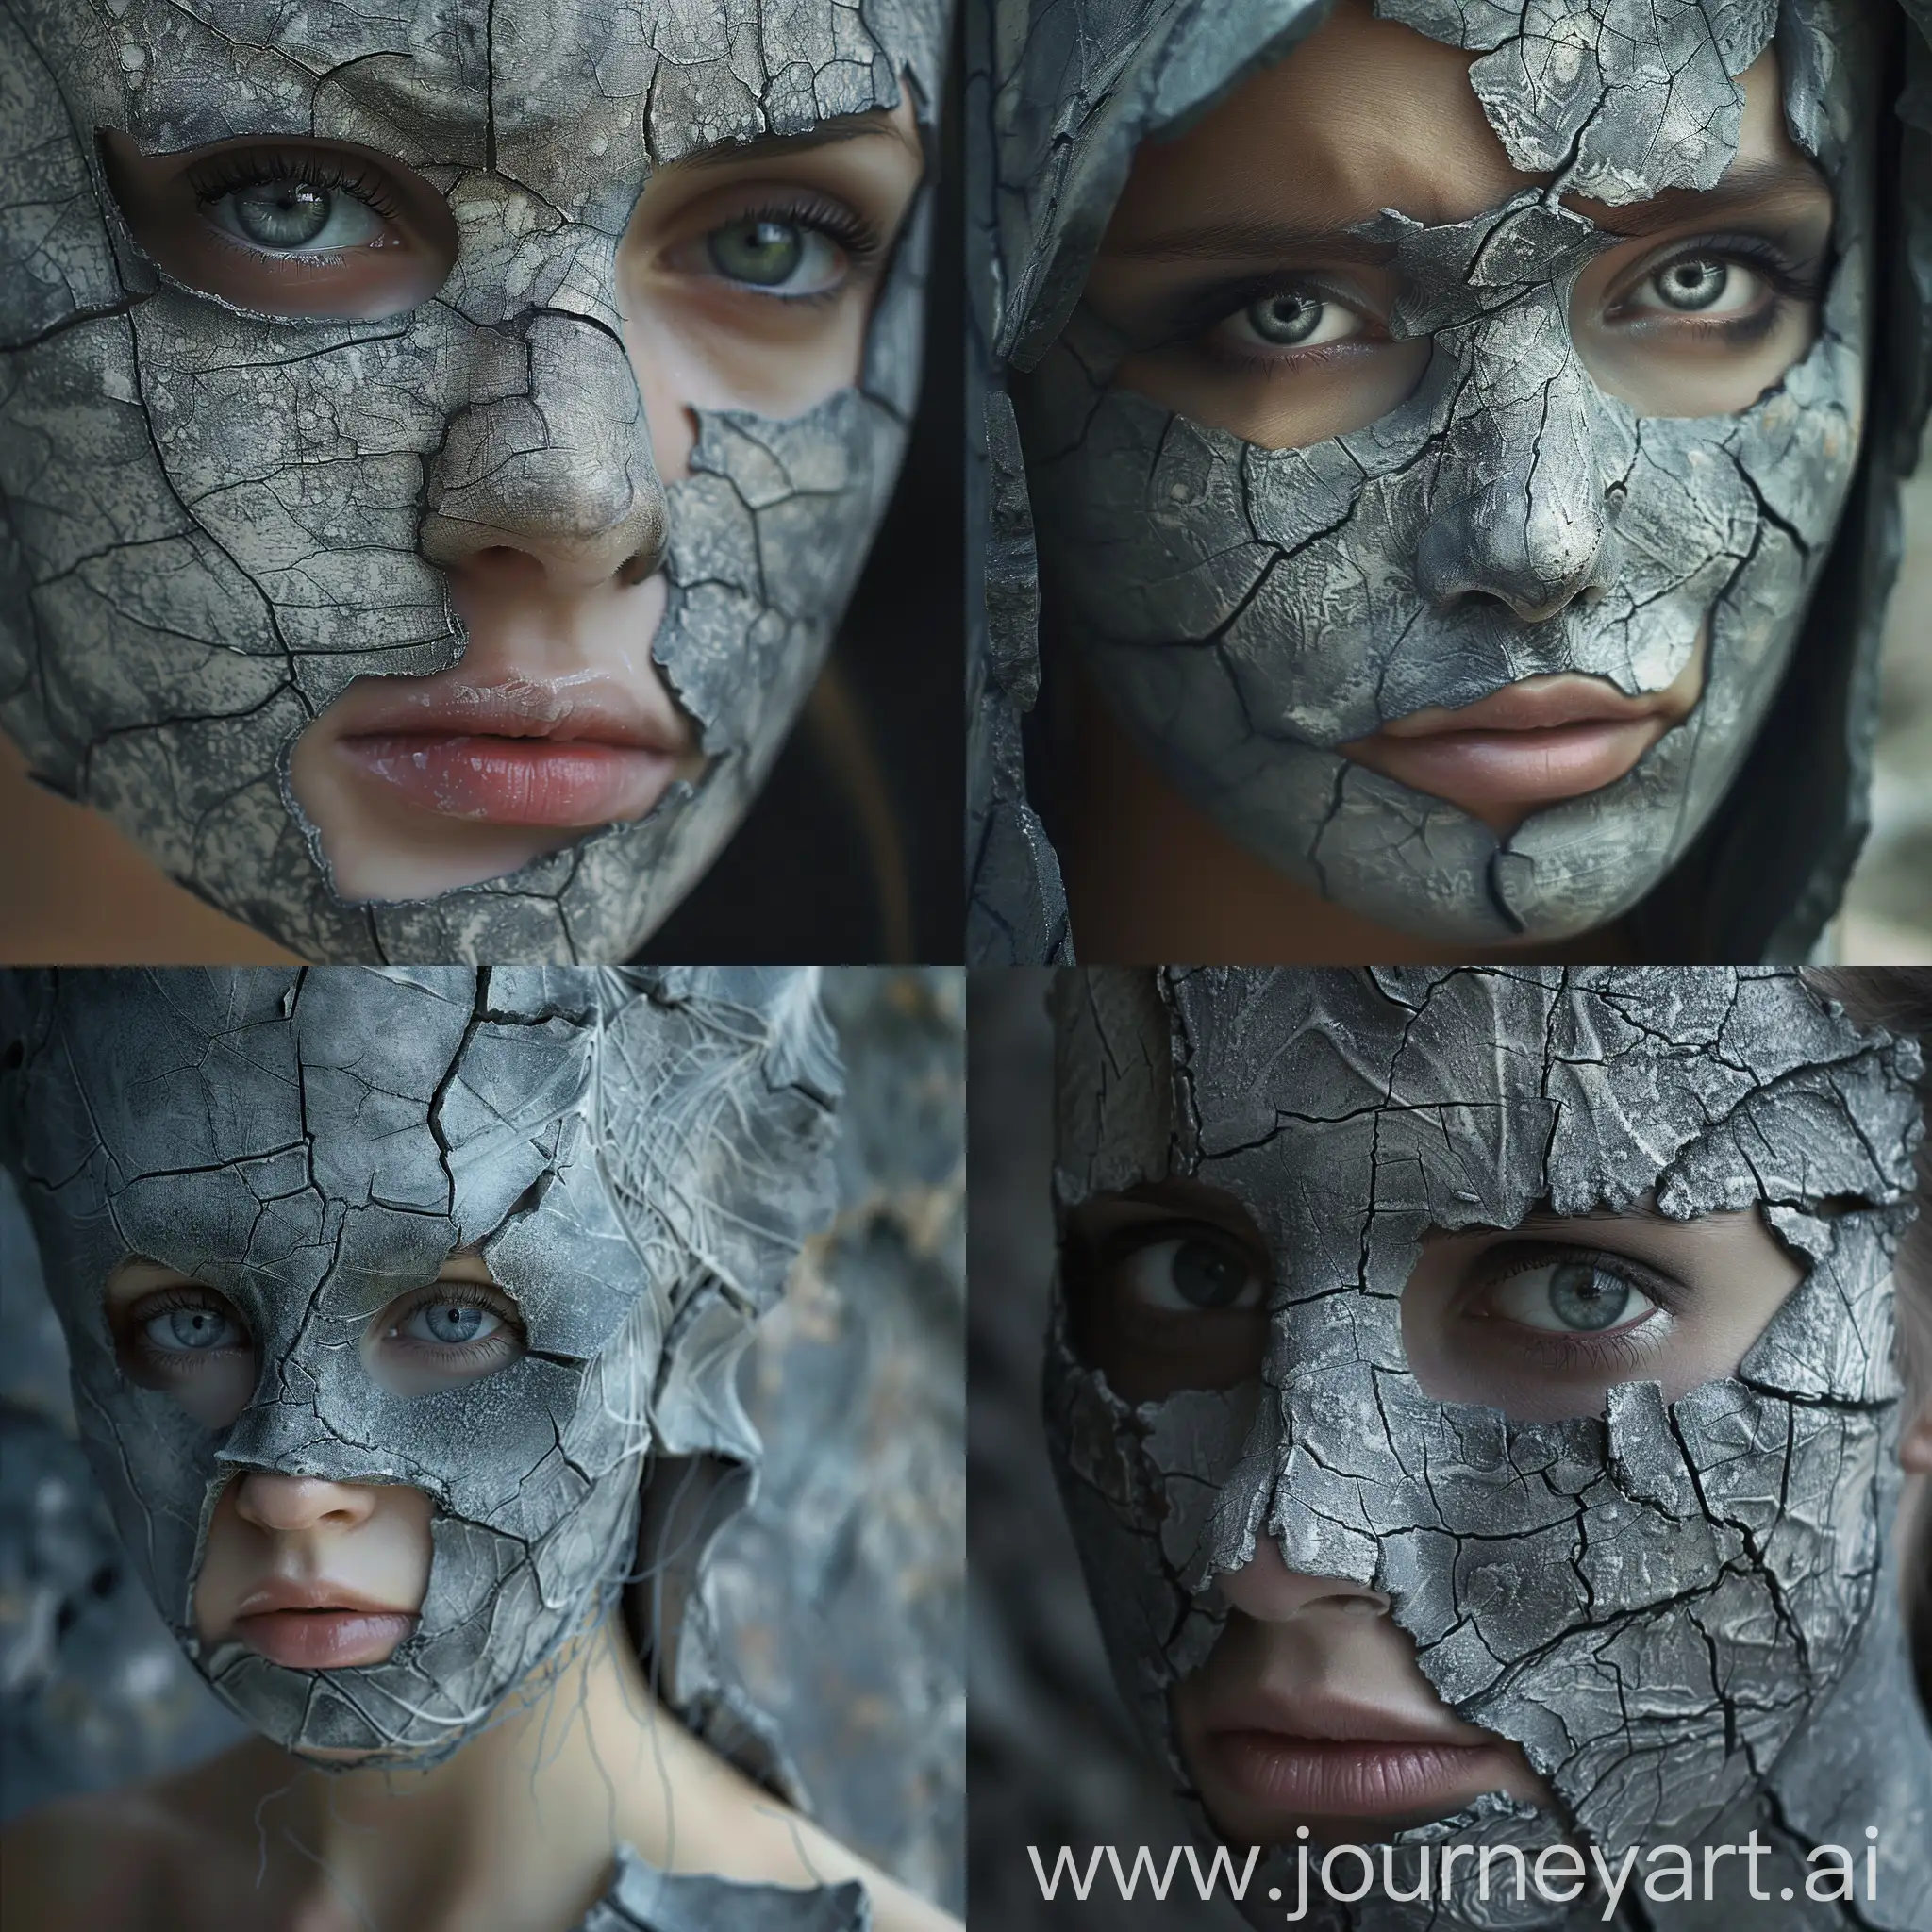 A beautiful sad eyed woman in a cracked grey stone like mask